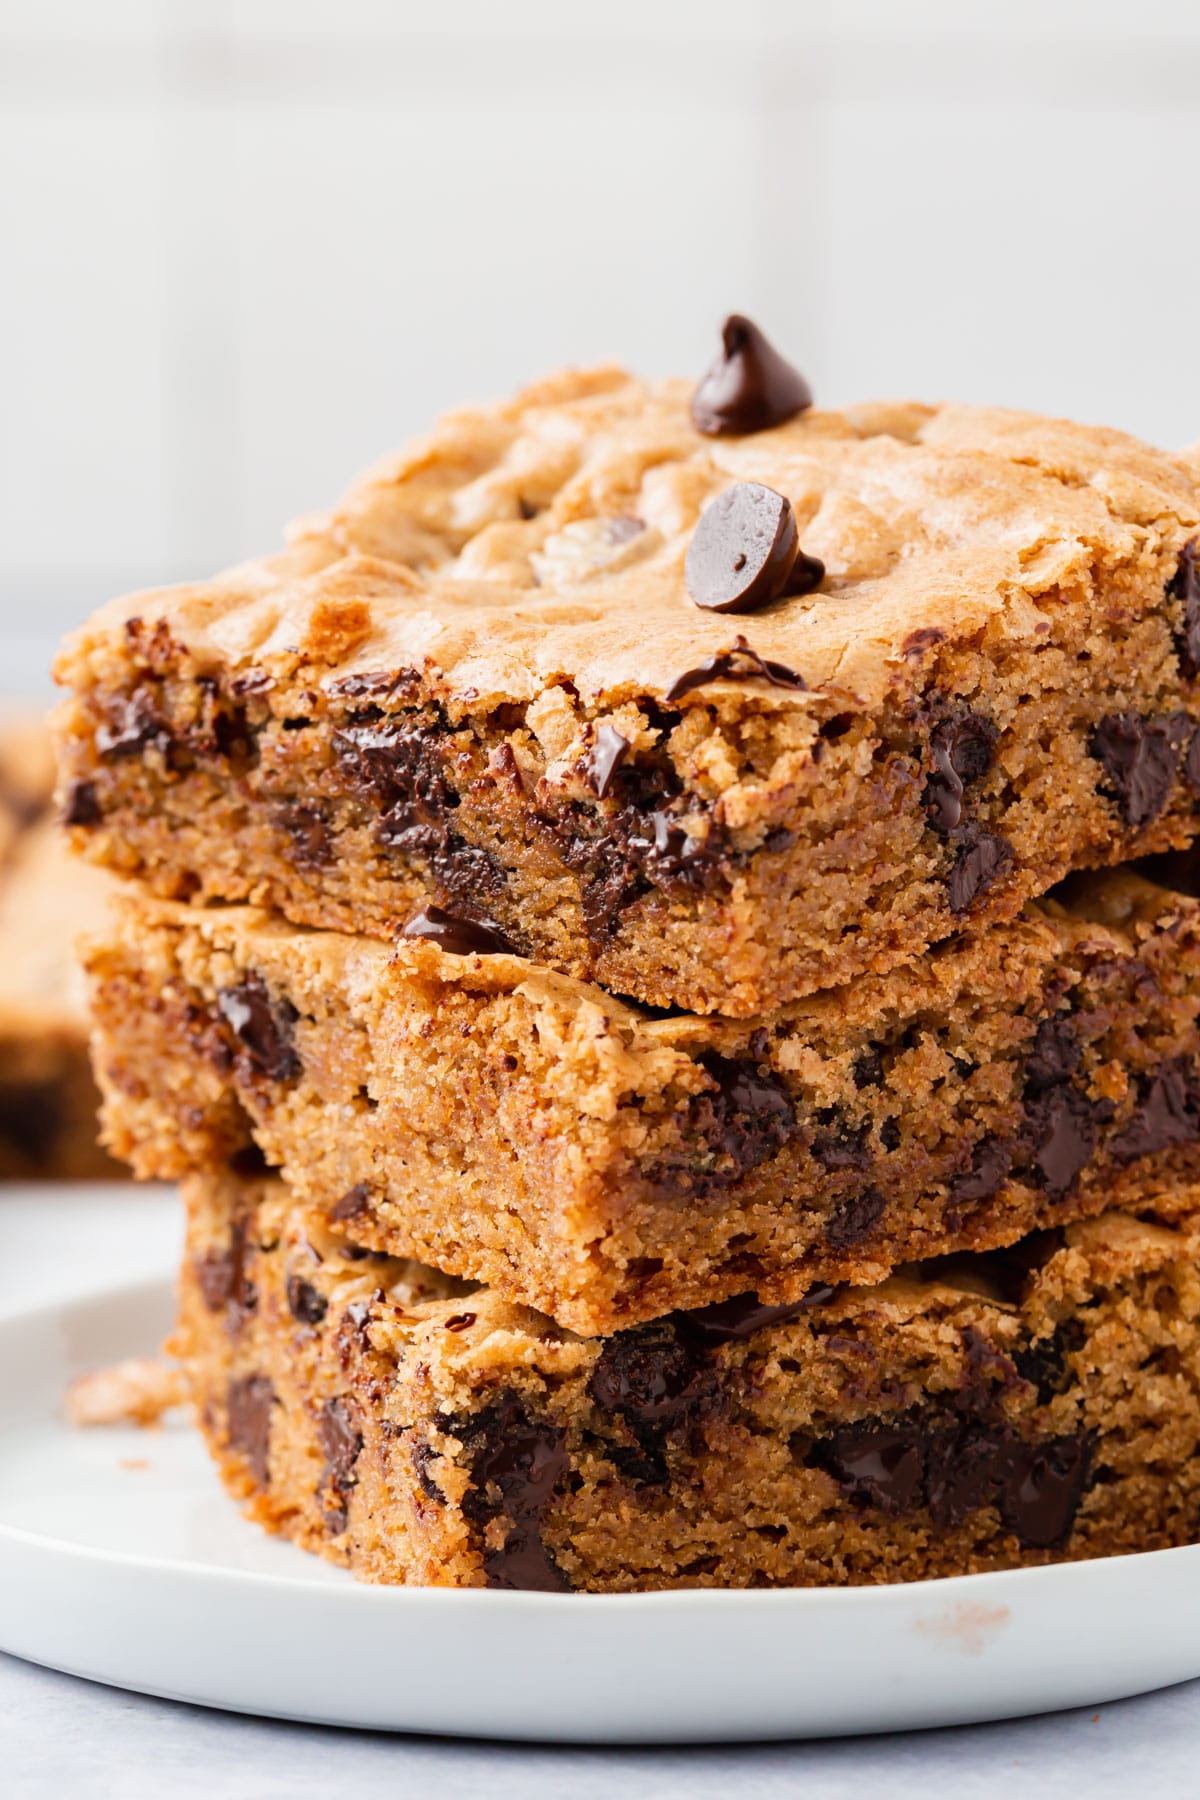 A stack of gluten-free chocolate chip cookie bars.